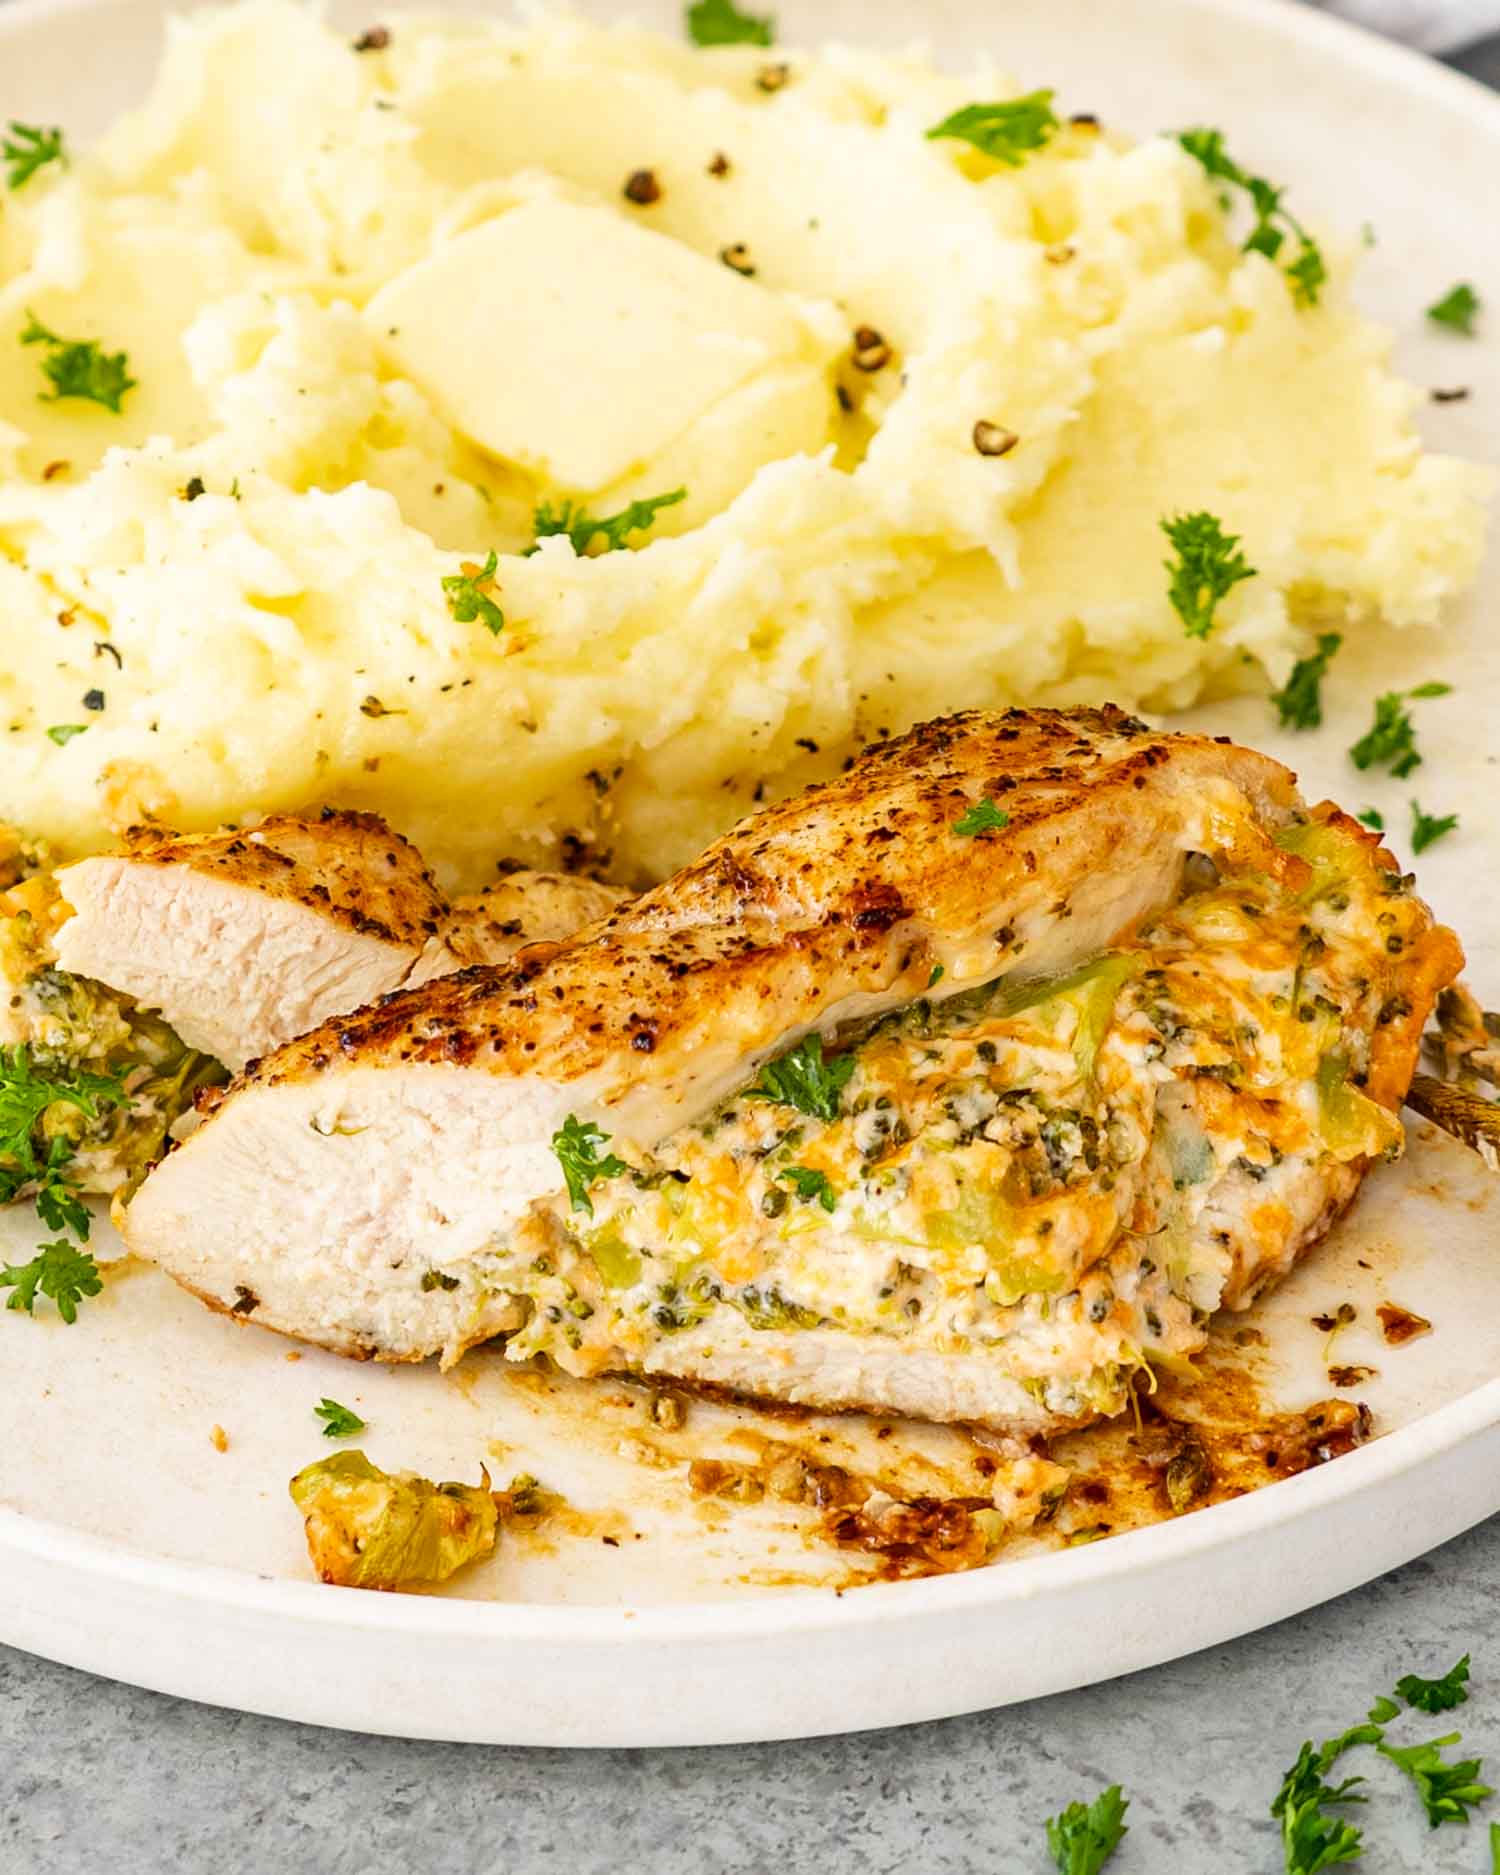 a serving of broccoli and cheddar stuffed chicken breast with mashed potatoes on a white plate.